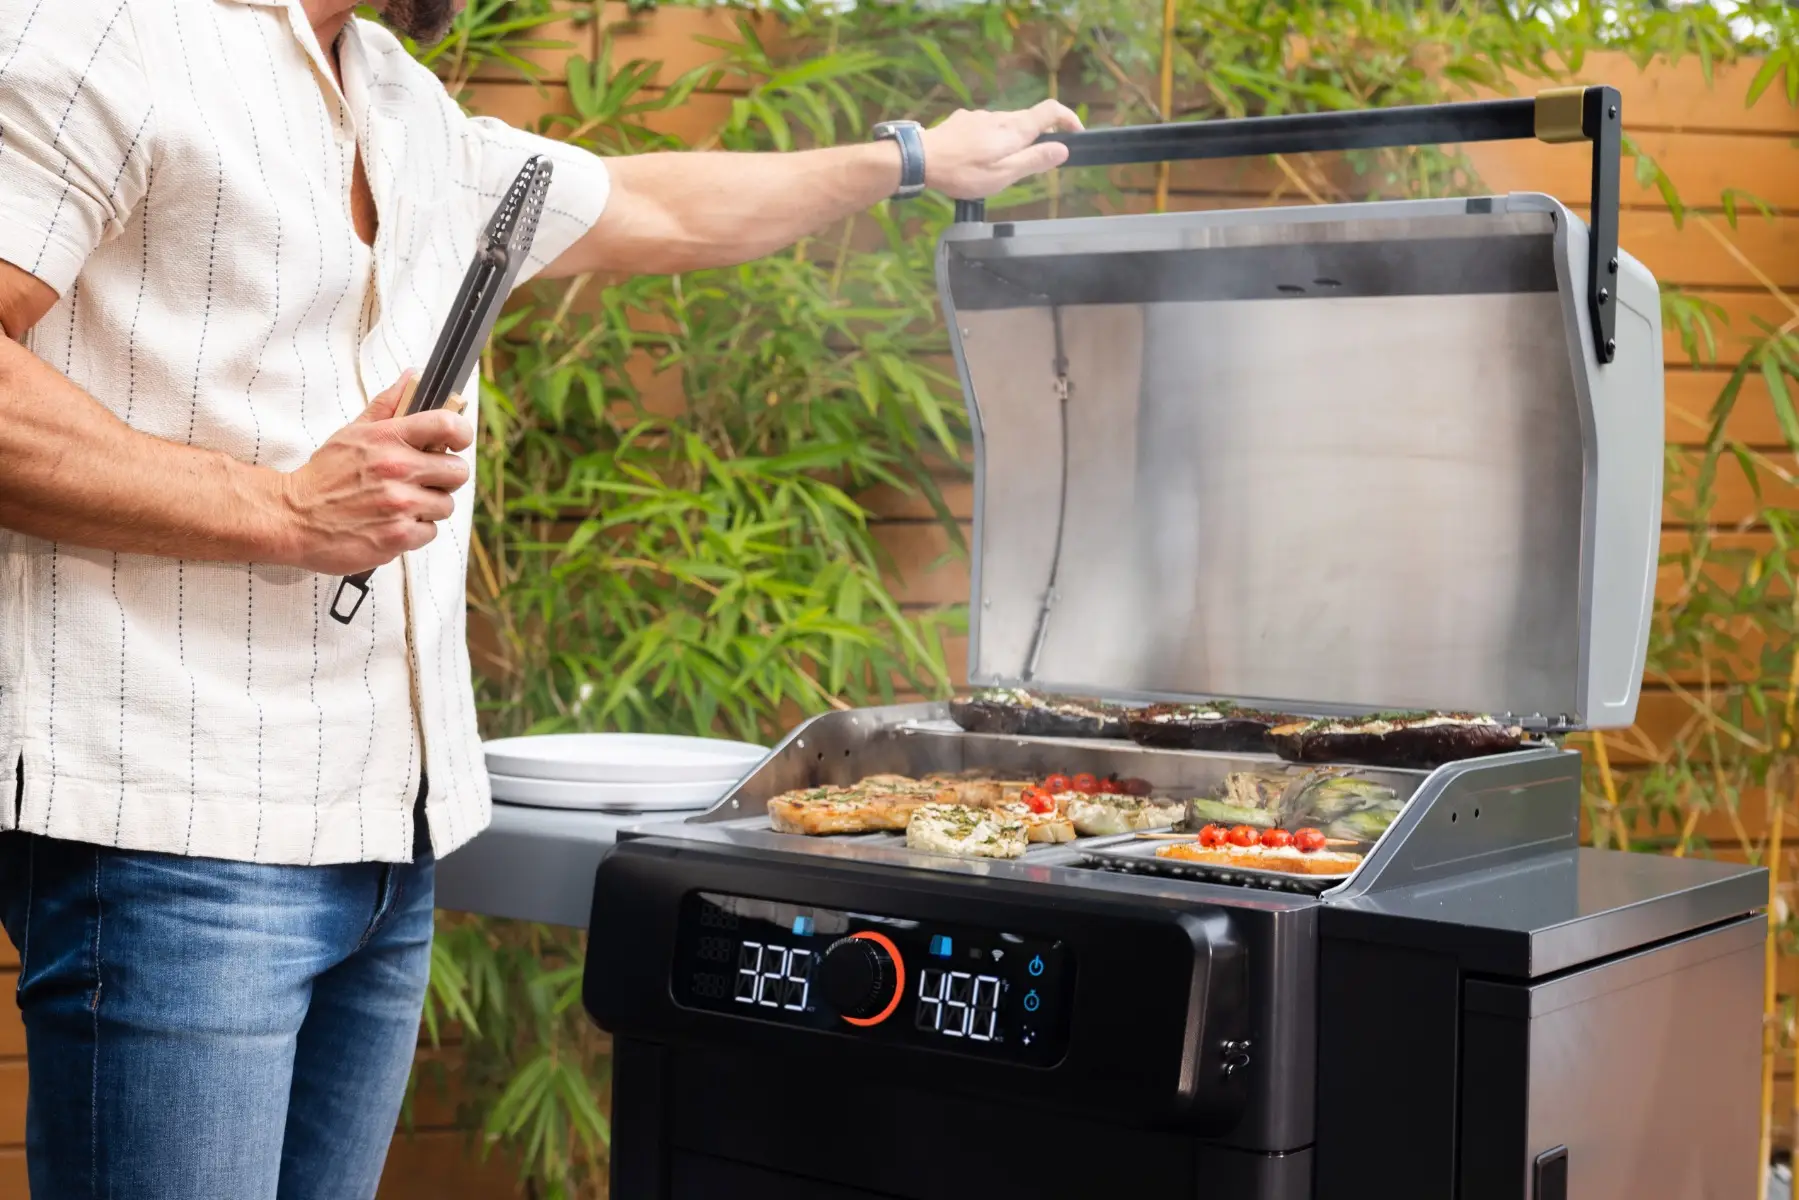 Packed with user-friendly tech features, this electric grill from Current Backyard is a tantalising taste of the future of home barbecue.